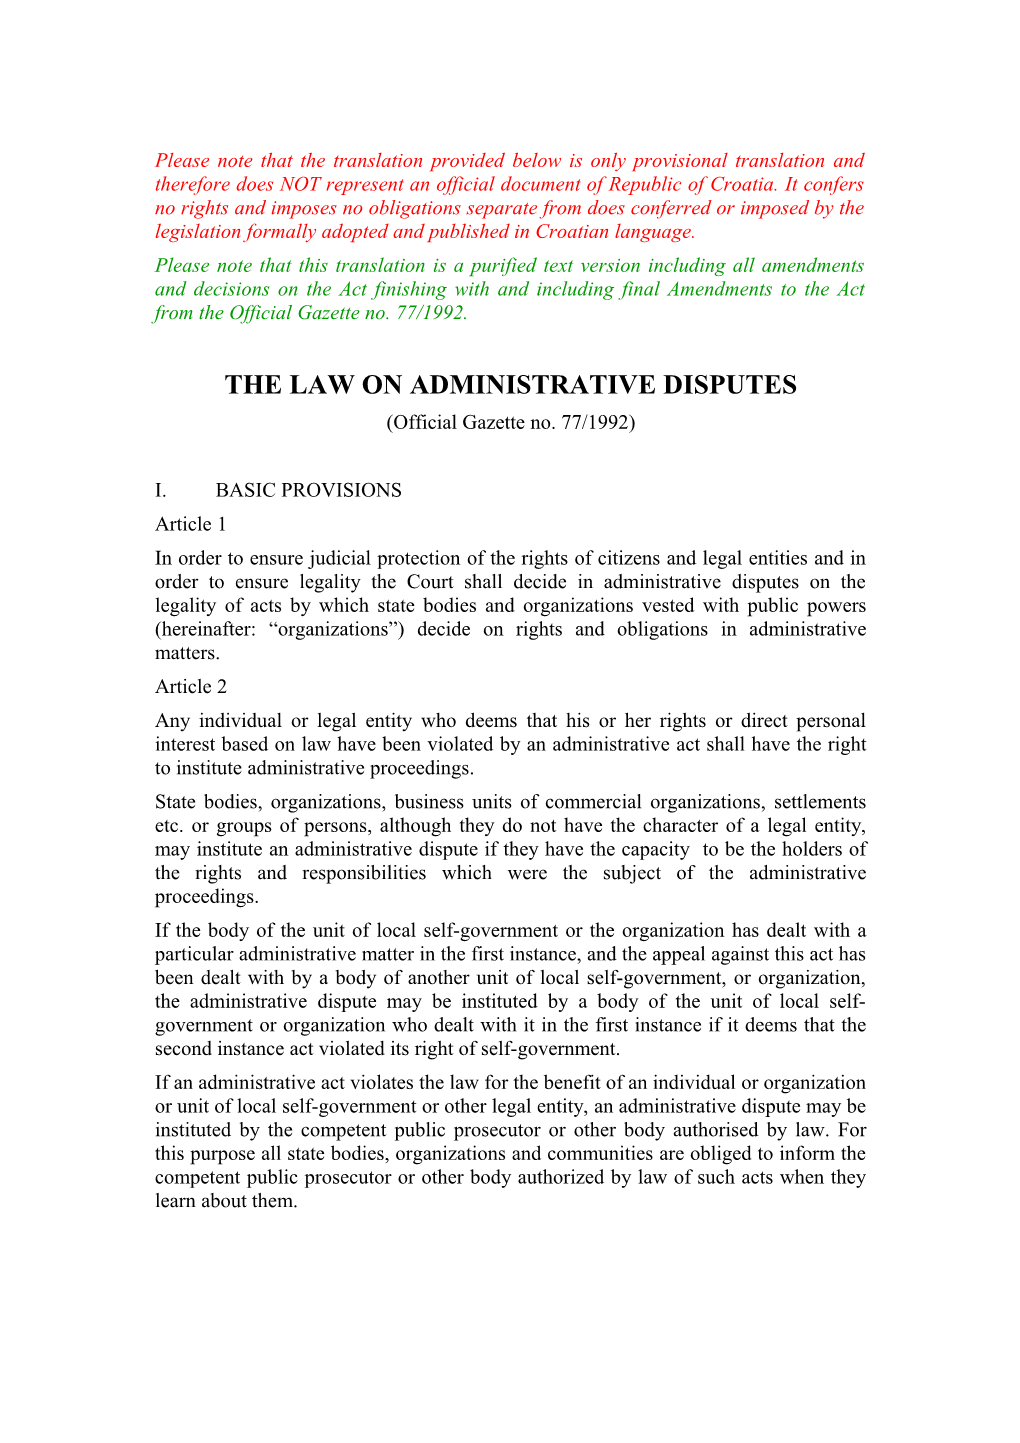 The Law on Administrative Disputes